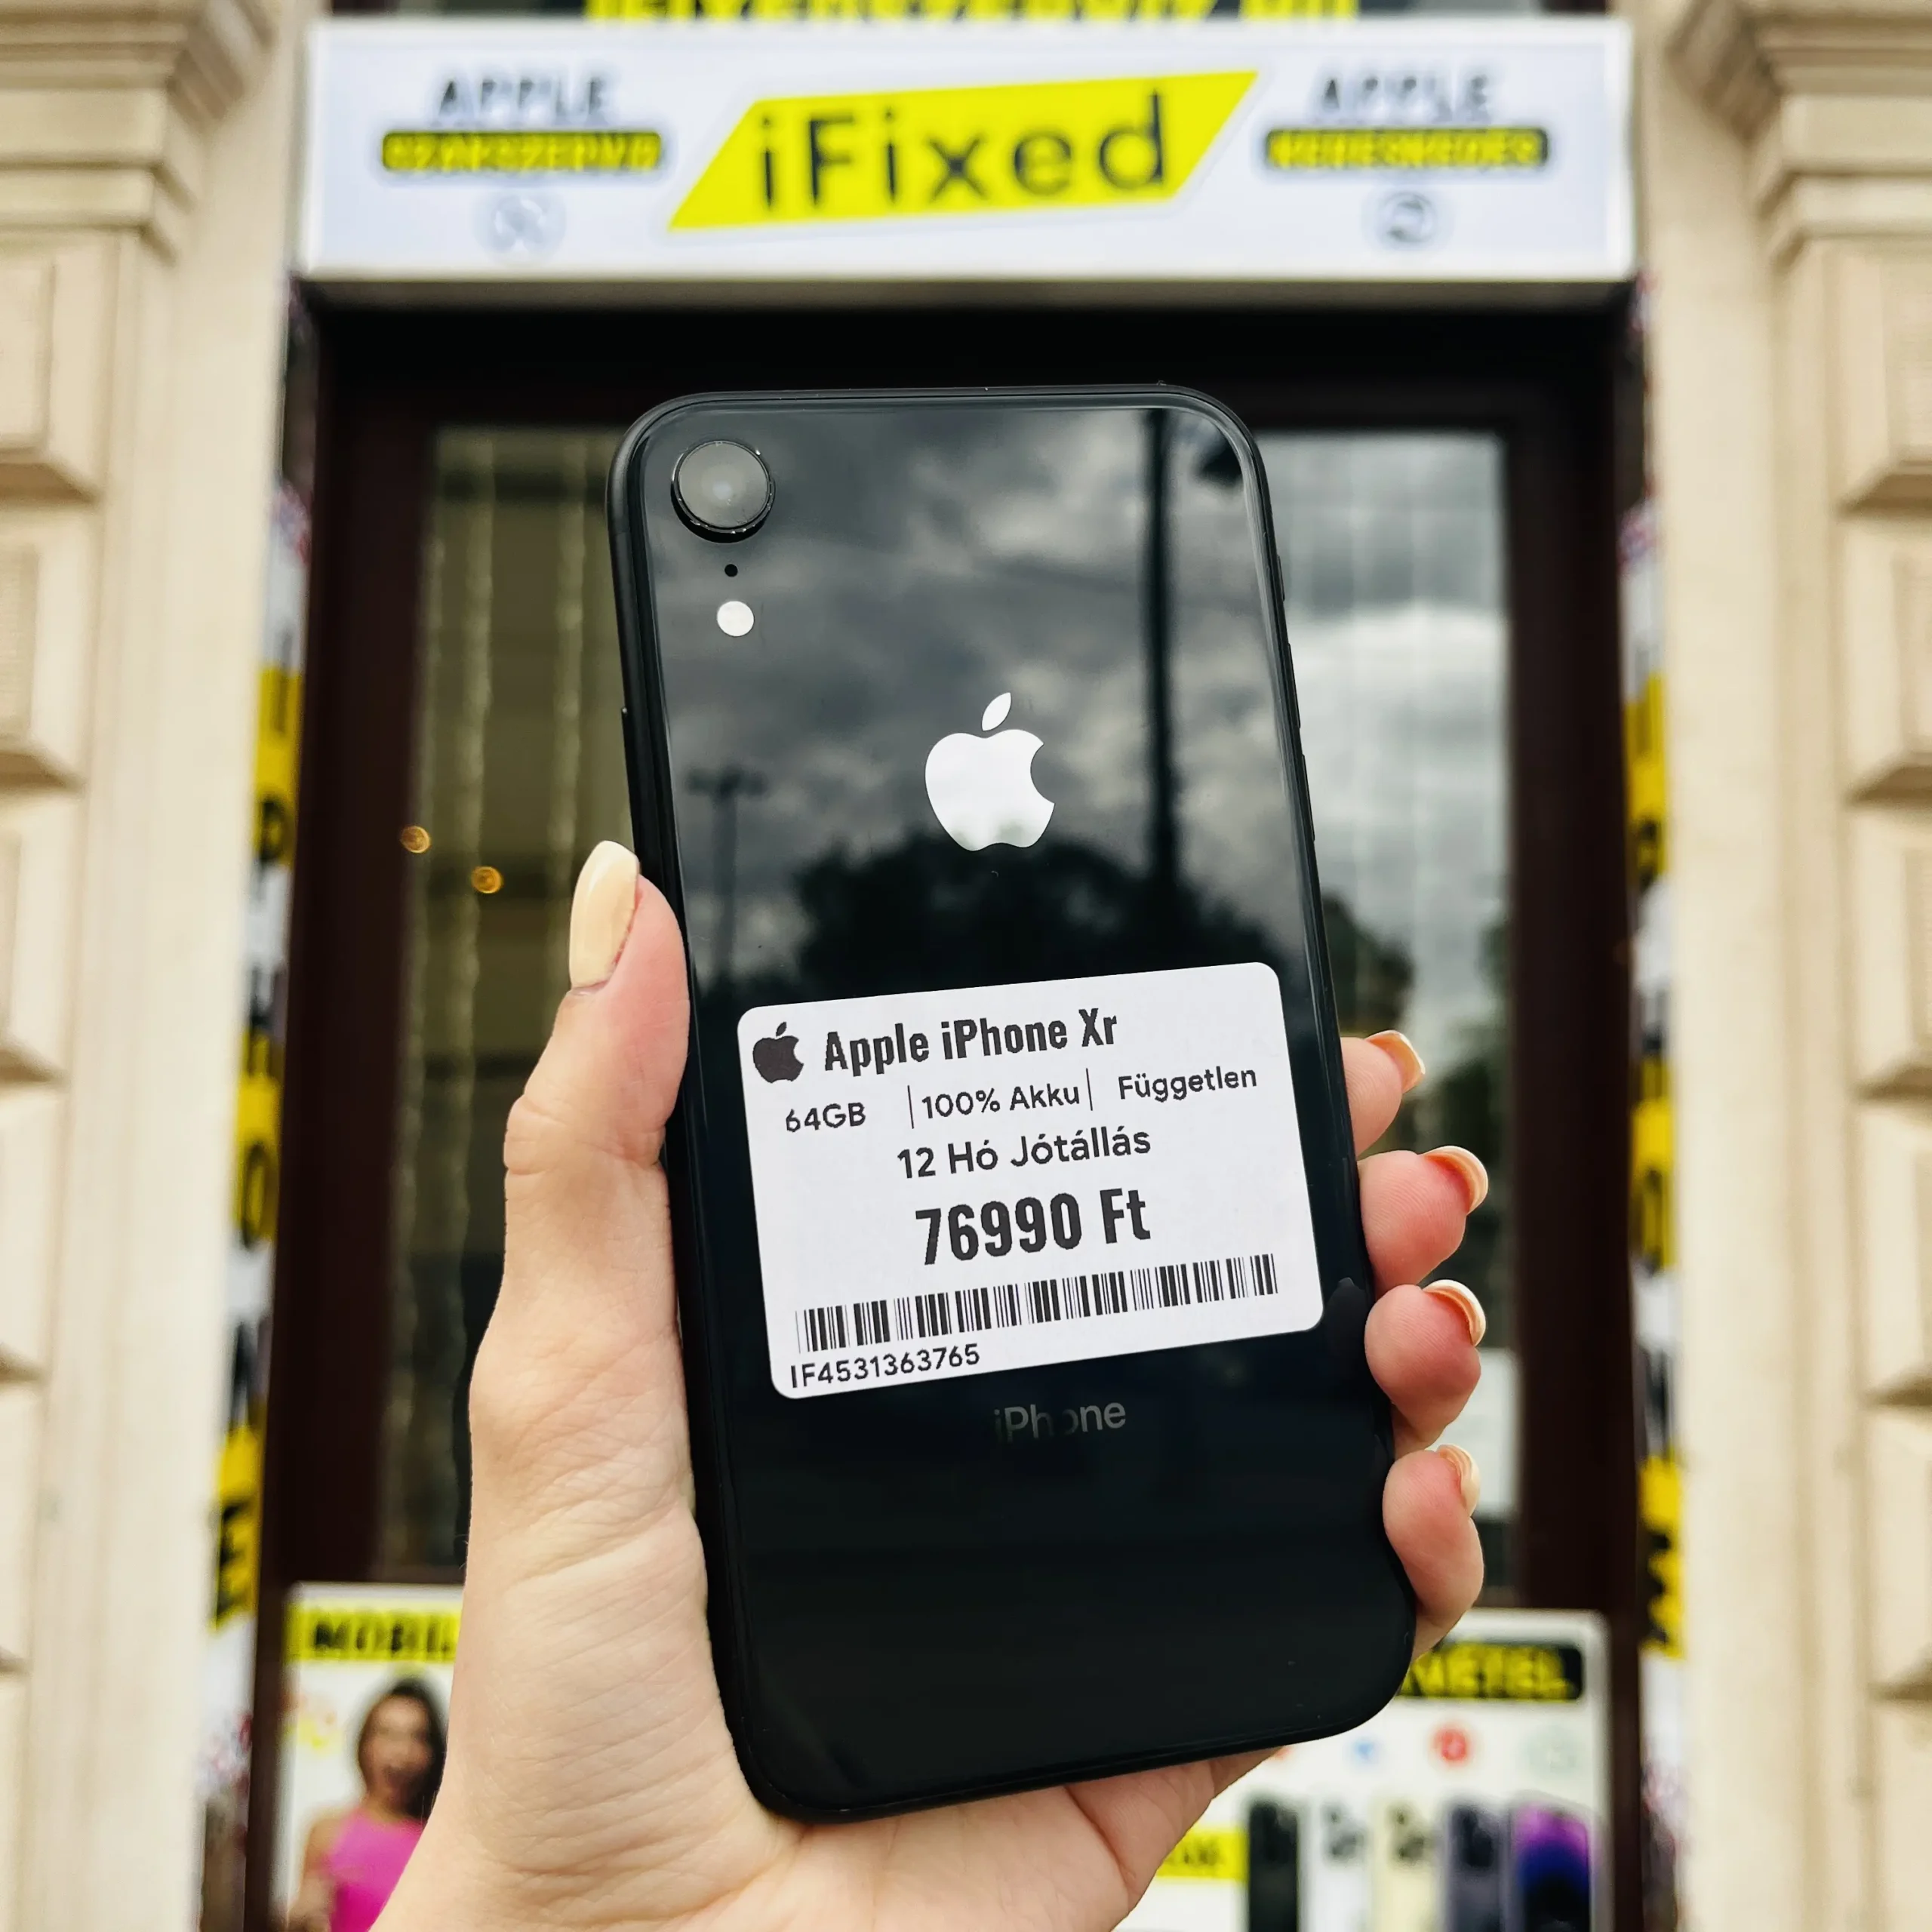 iphone xr (if4531363765)